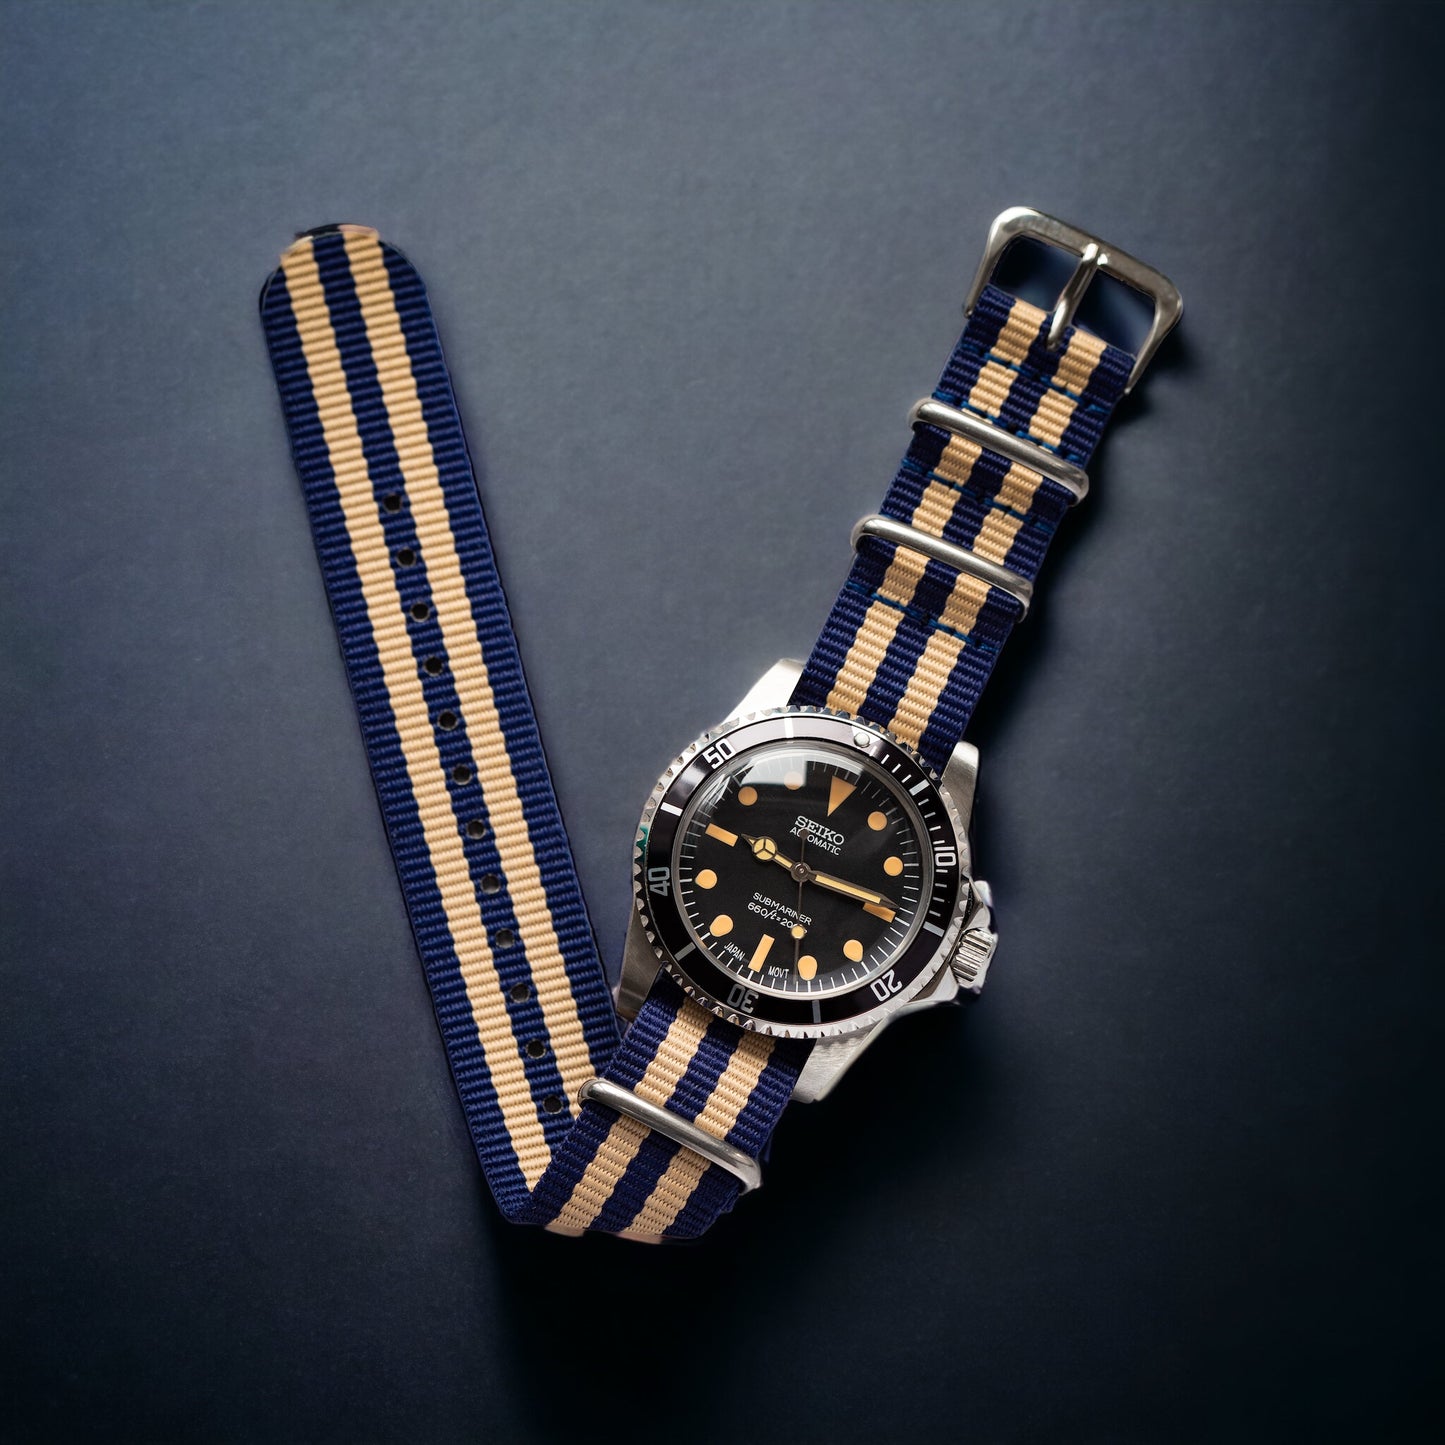 Seiko Mod T Dial Automatic Watch in Vintage Style